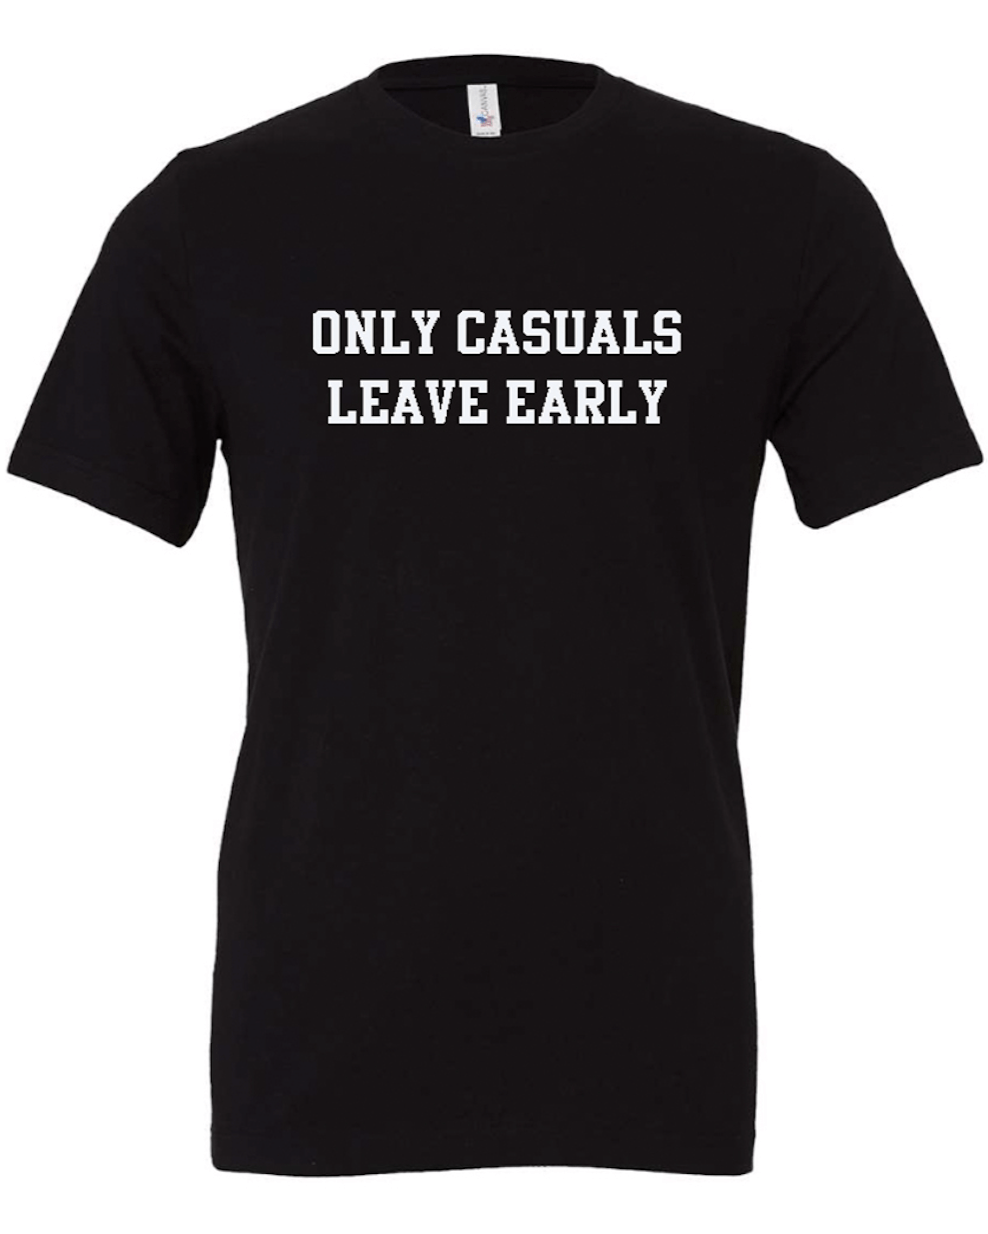 Only Casuals Leave Early T-shirt